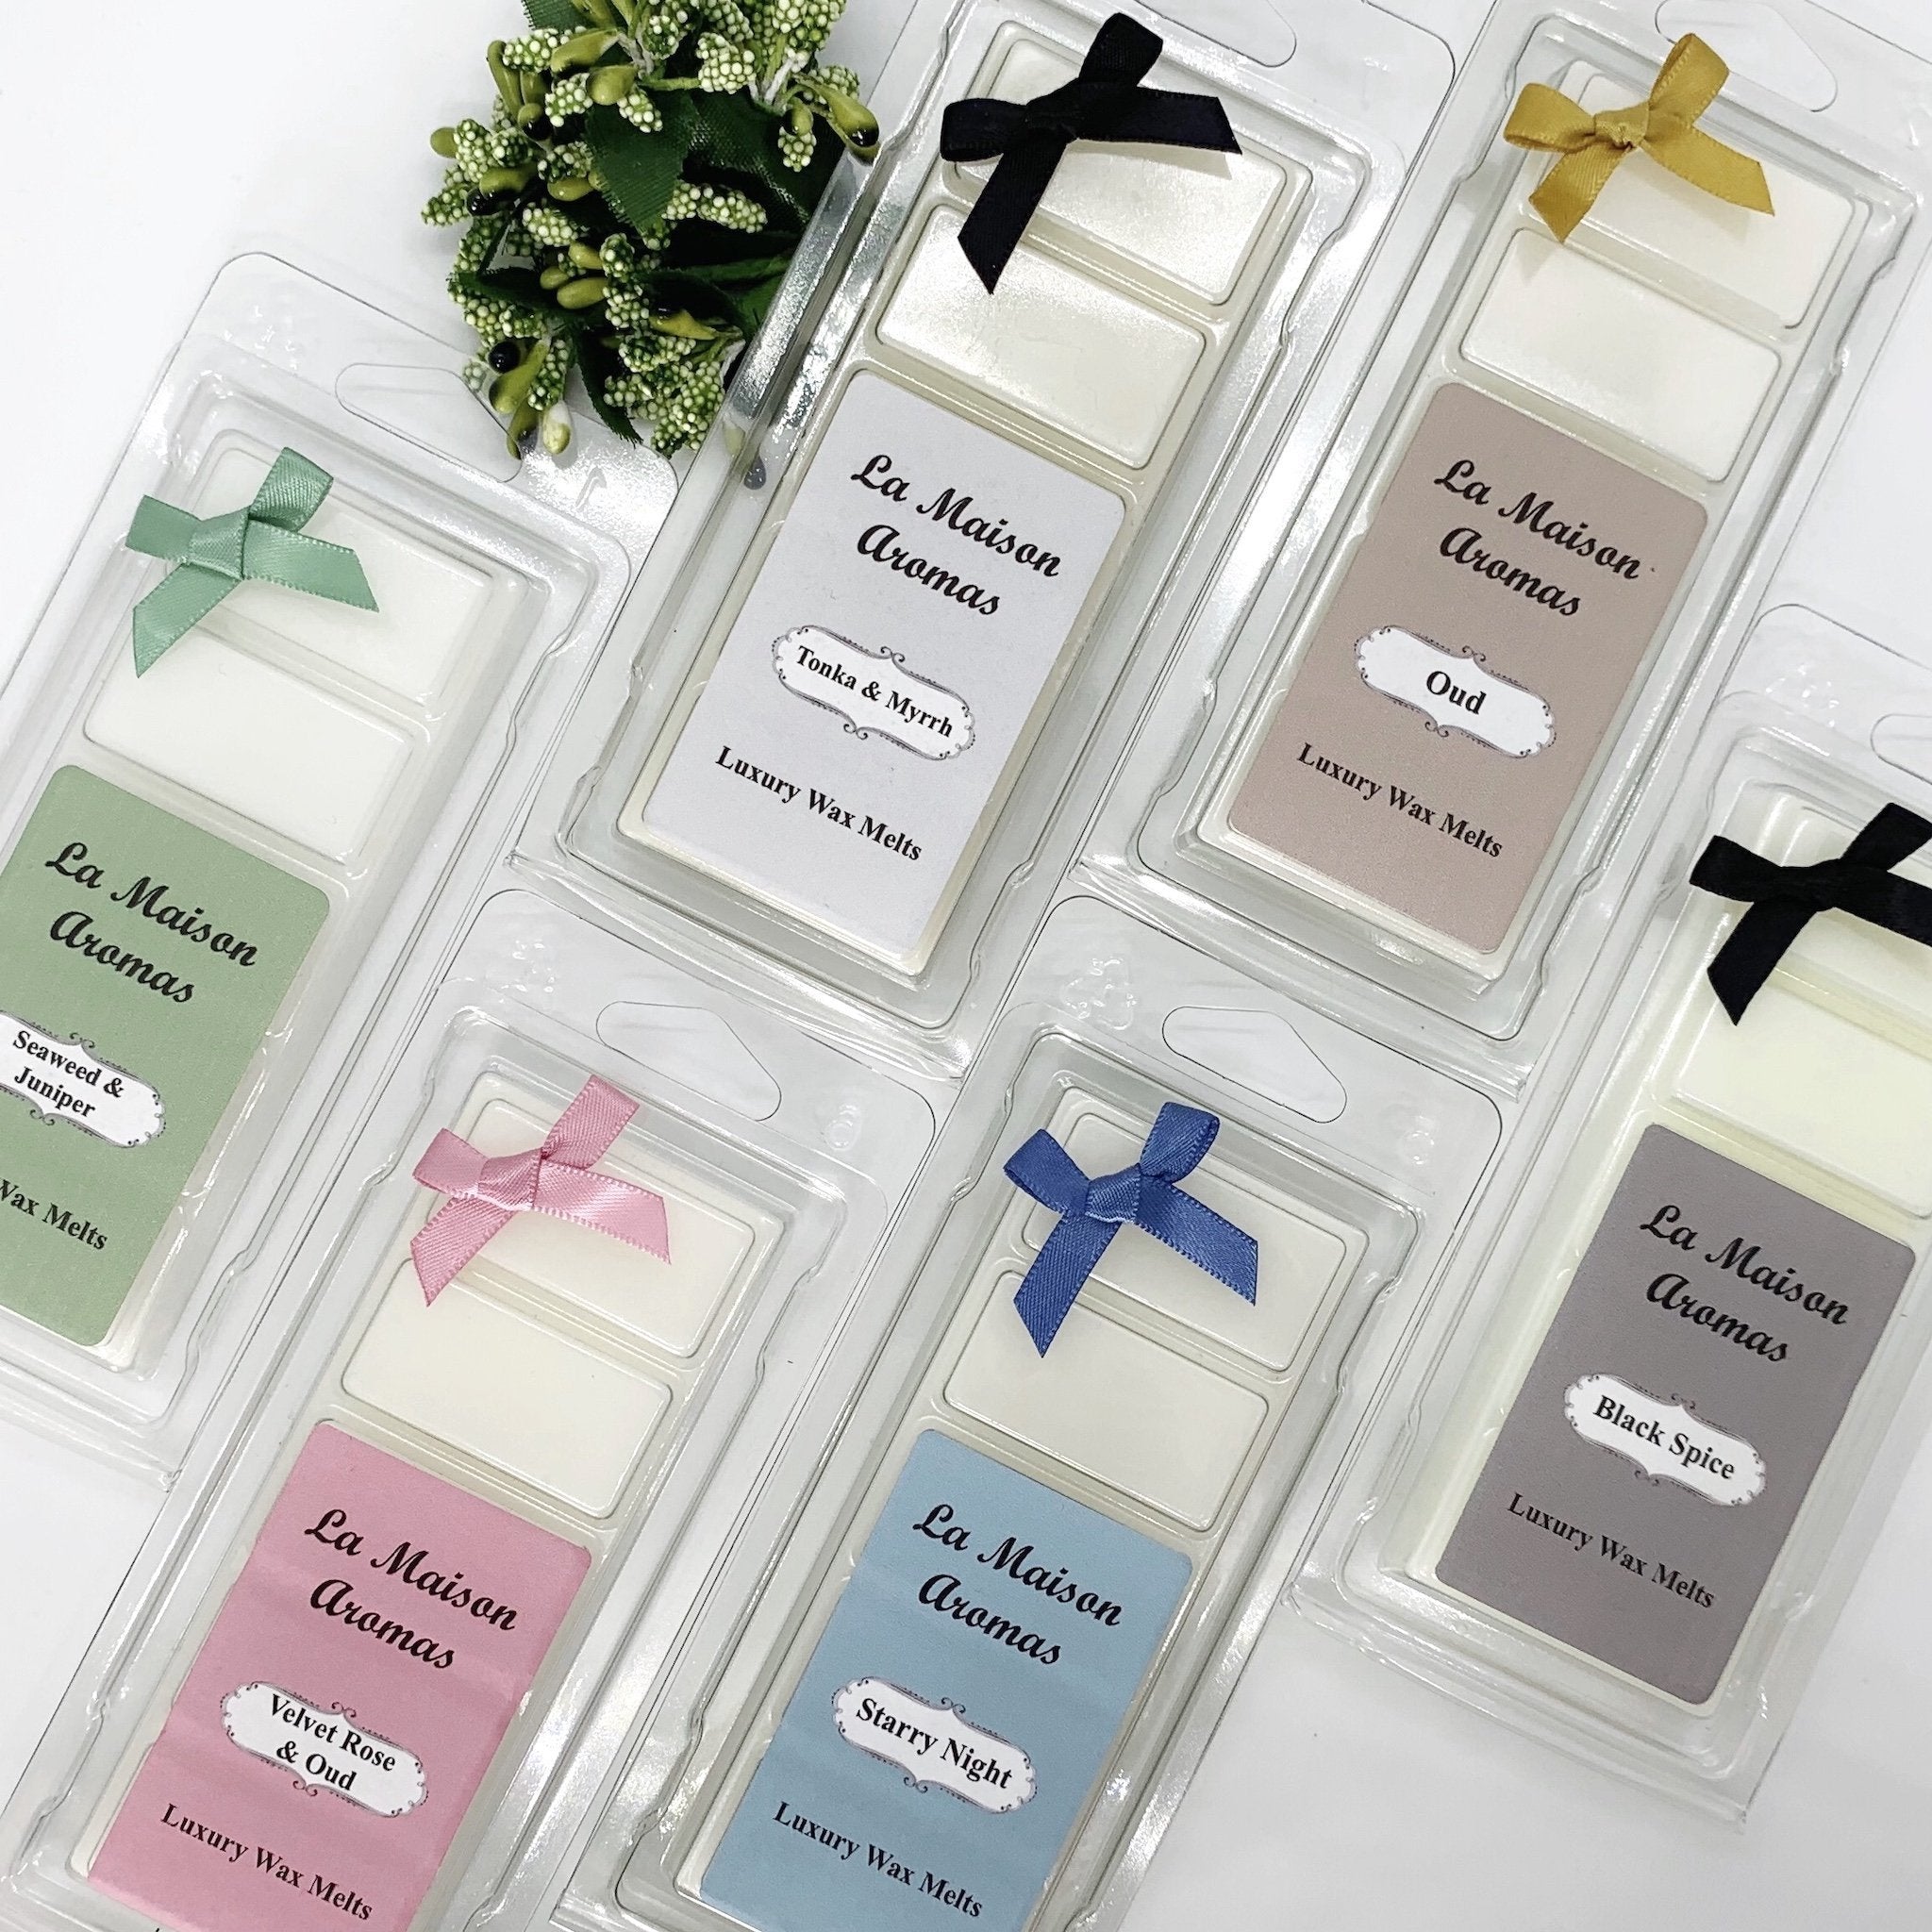 Soy Wax Melt Snap Bars Highly Scented Wax Melts Vegan & Cruelty Free Wax  Melts Home Fragrance 